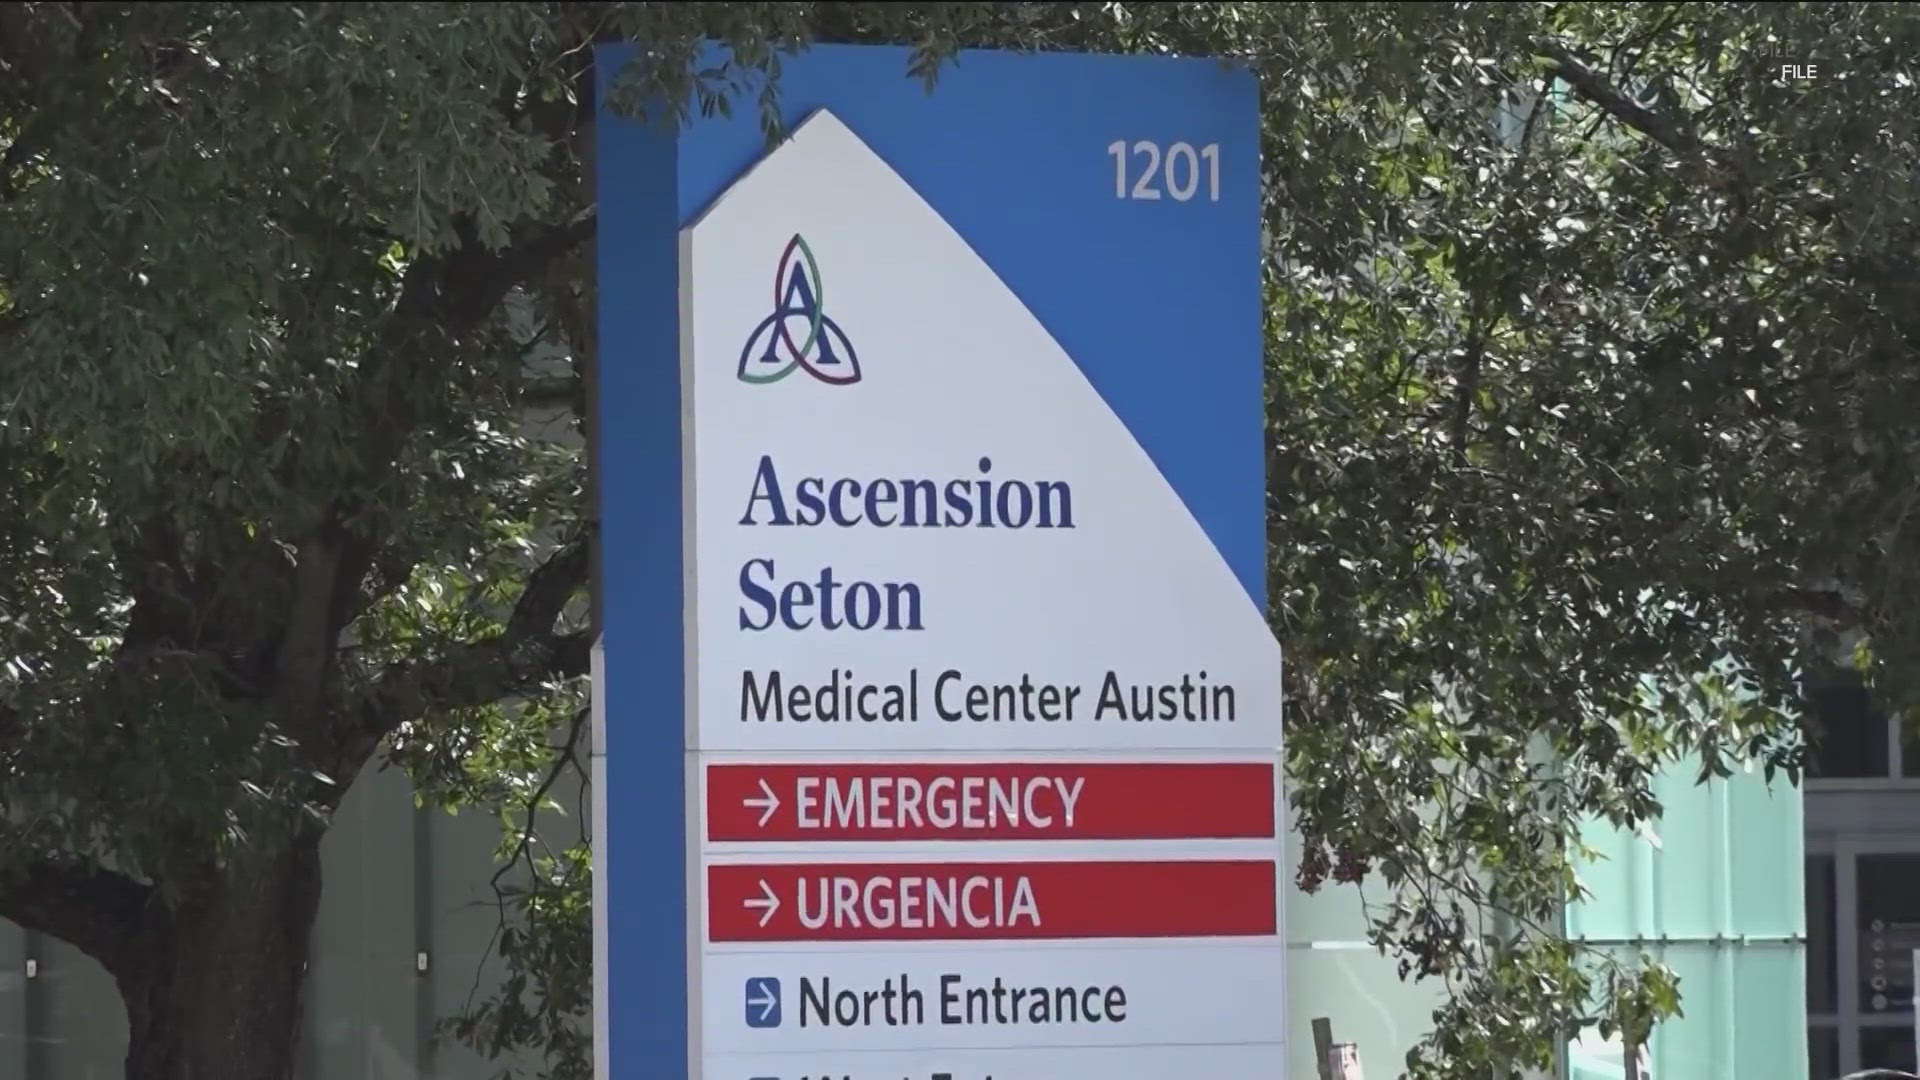 Ascension hospitals across the country, including in Austin, were possibly targeted in a cybersecurity event.